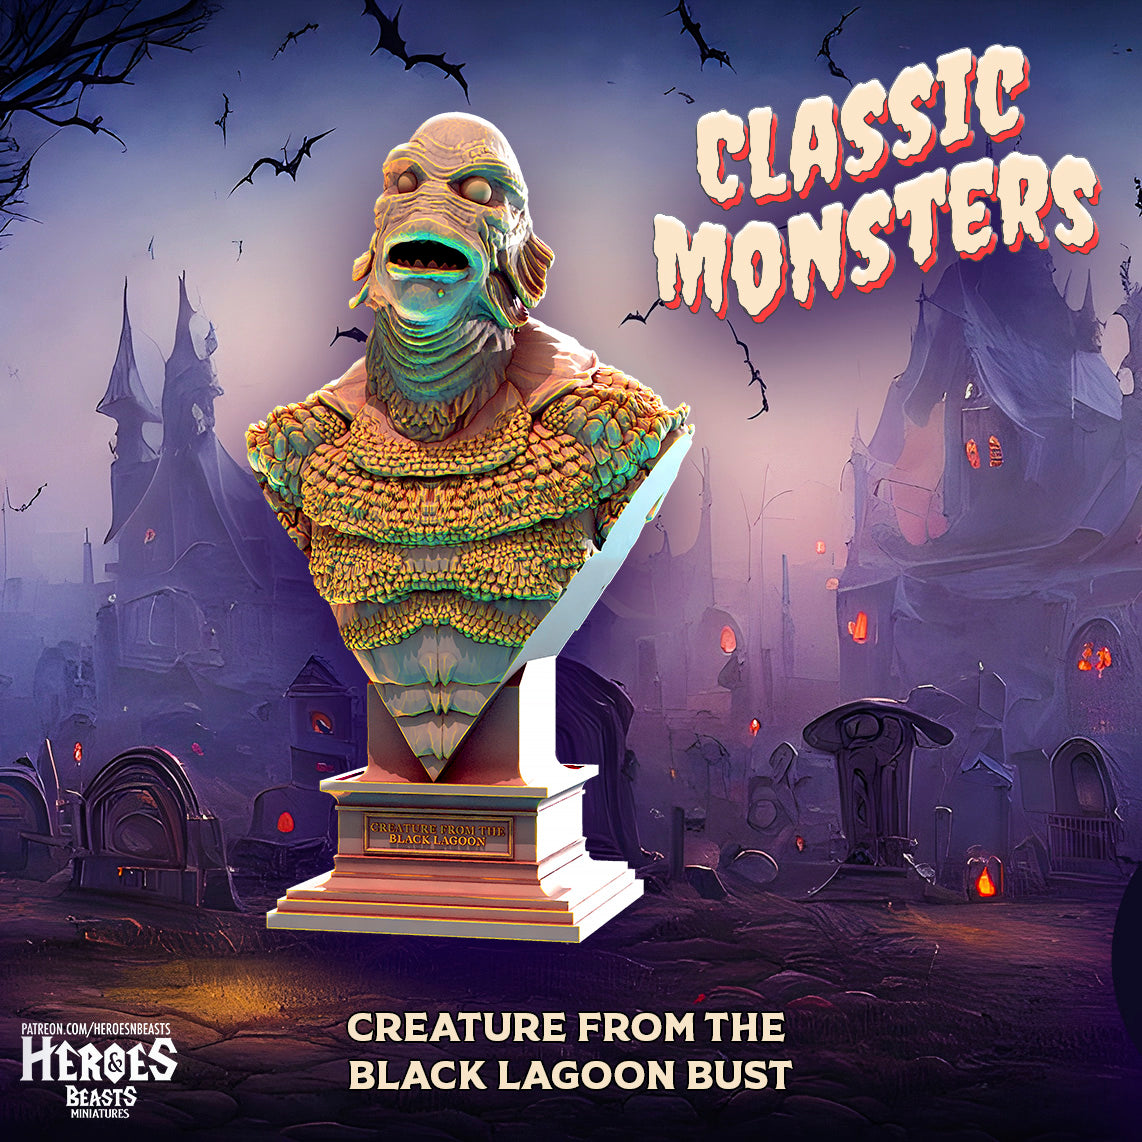 Creature from the Black Lagoon by HeroesNBeasts | Pleae Read Description